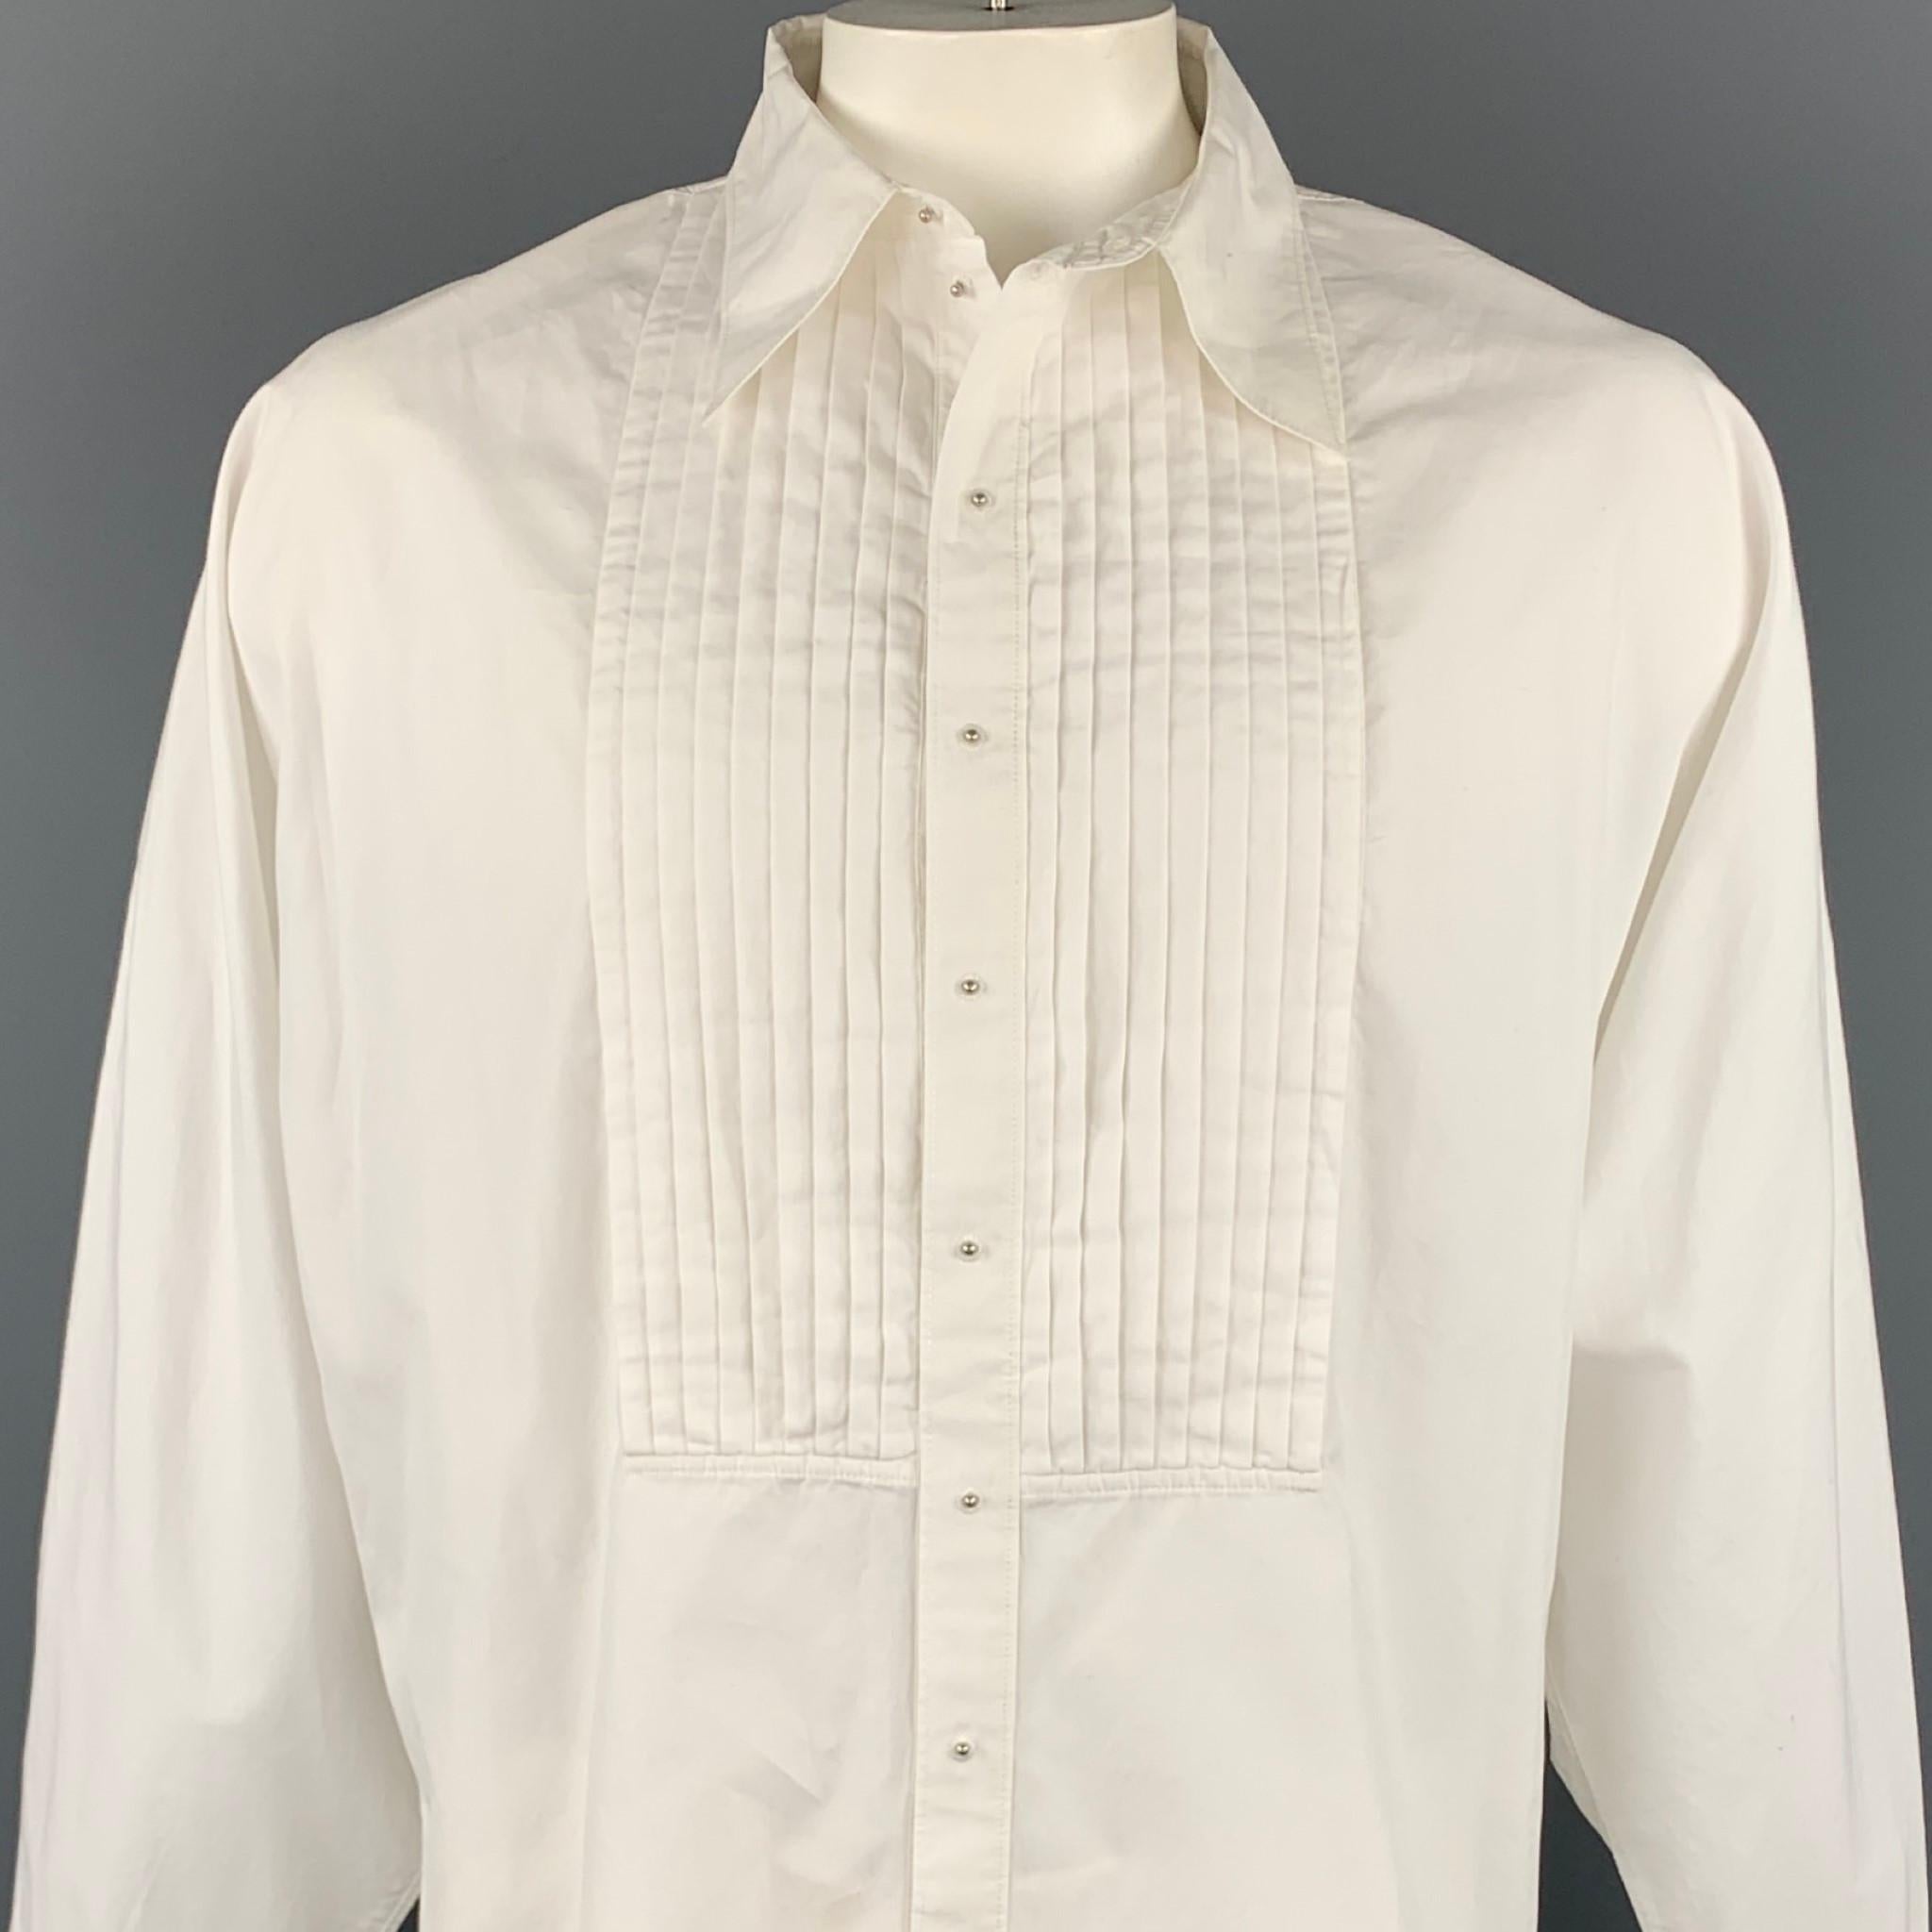 Vintage JEAN PAUL GAULTIER long sleeve shirt comes in a white cotton with front pleats featuring a wing sleeve design, spread collar, and a buttoned stud closure. Moderate wear. Made in Italy.

Good Pre-Owned Condition.
Marked: